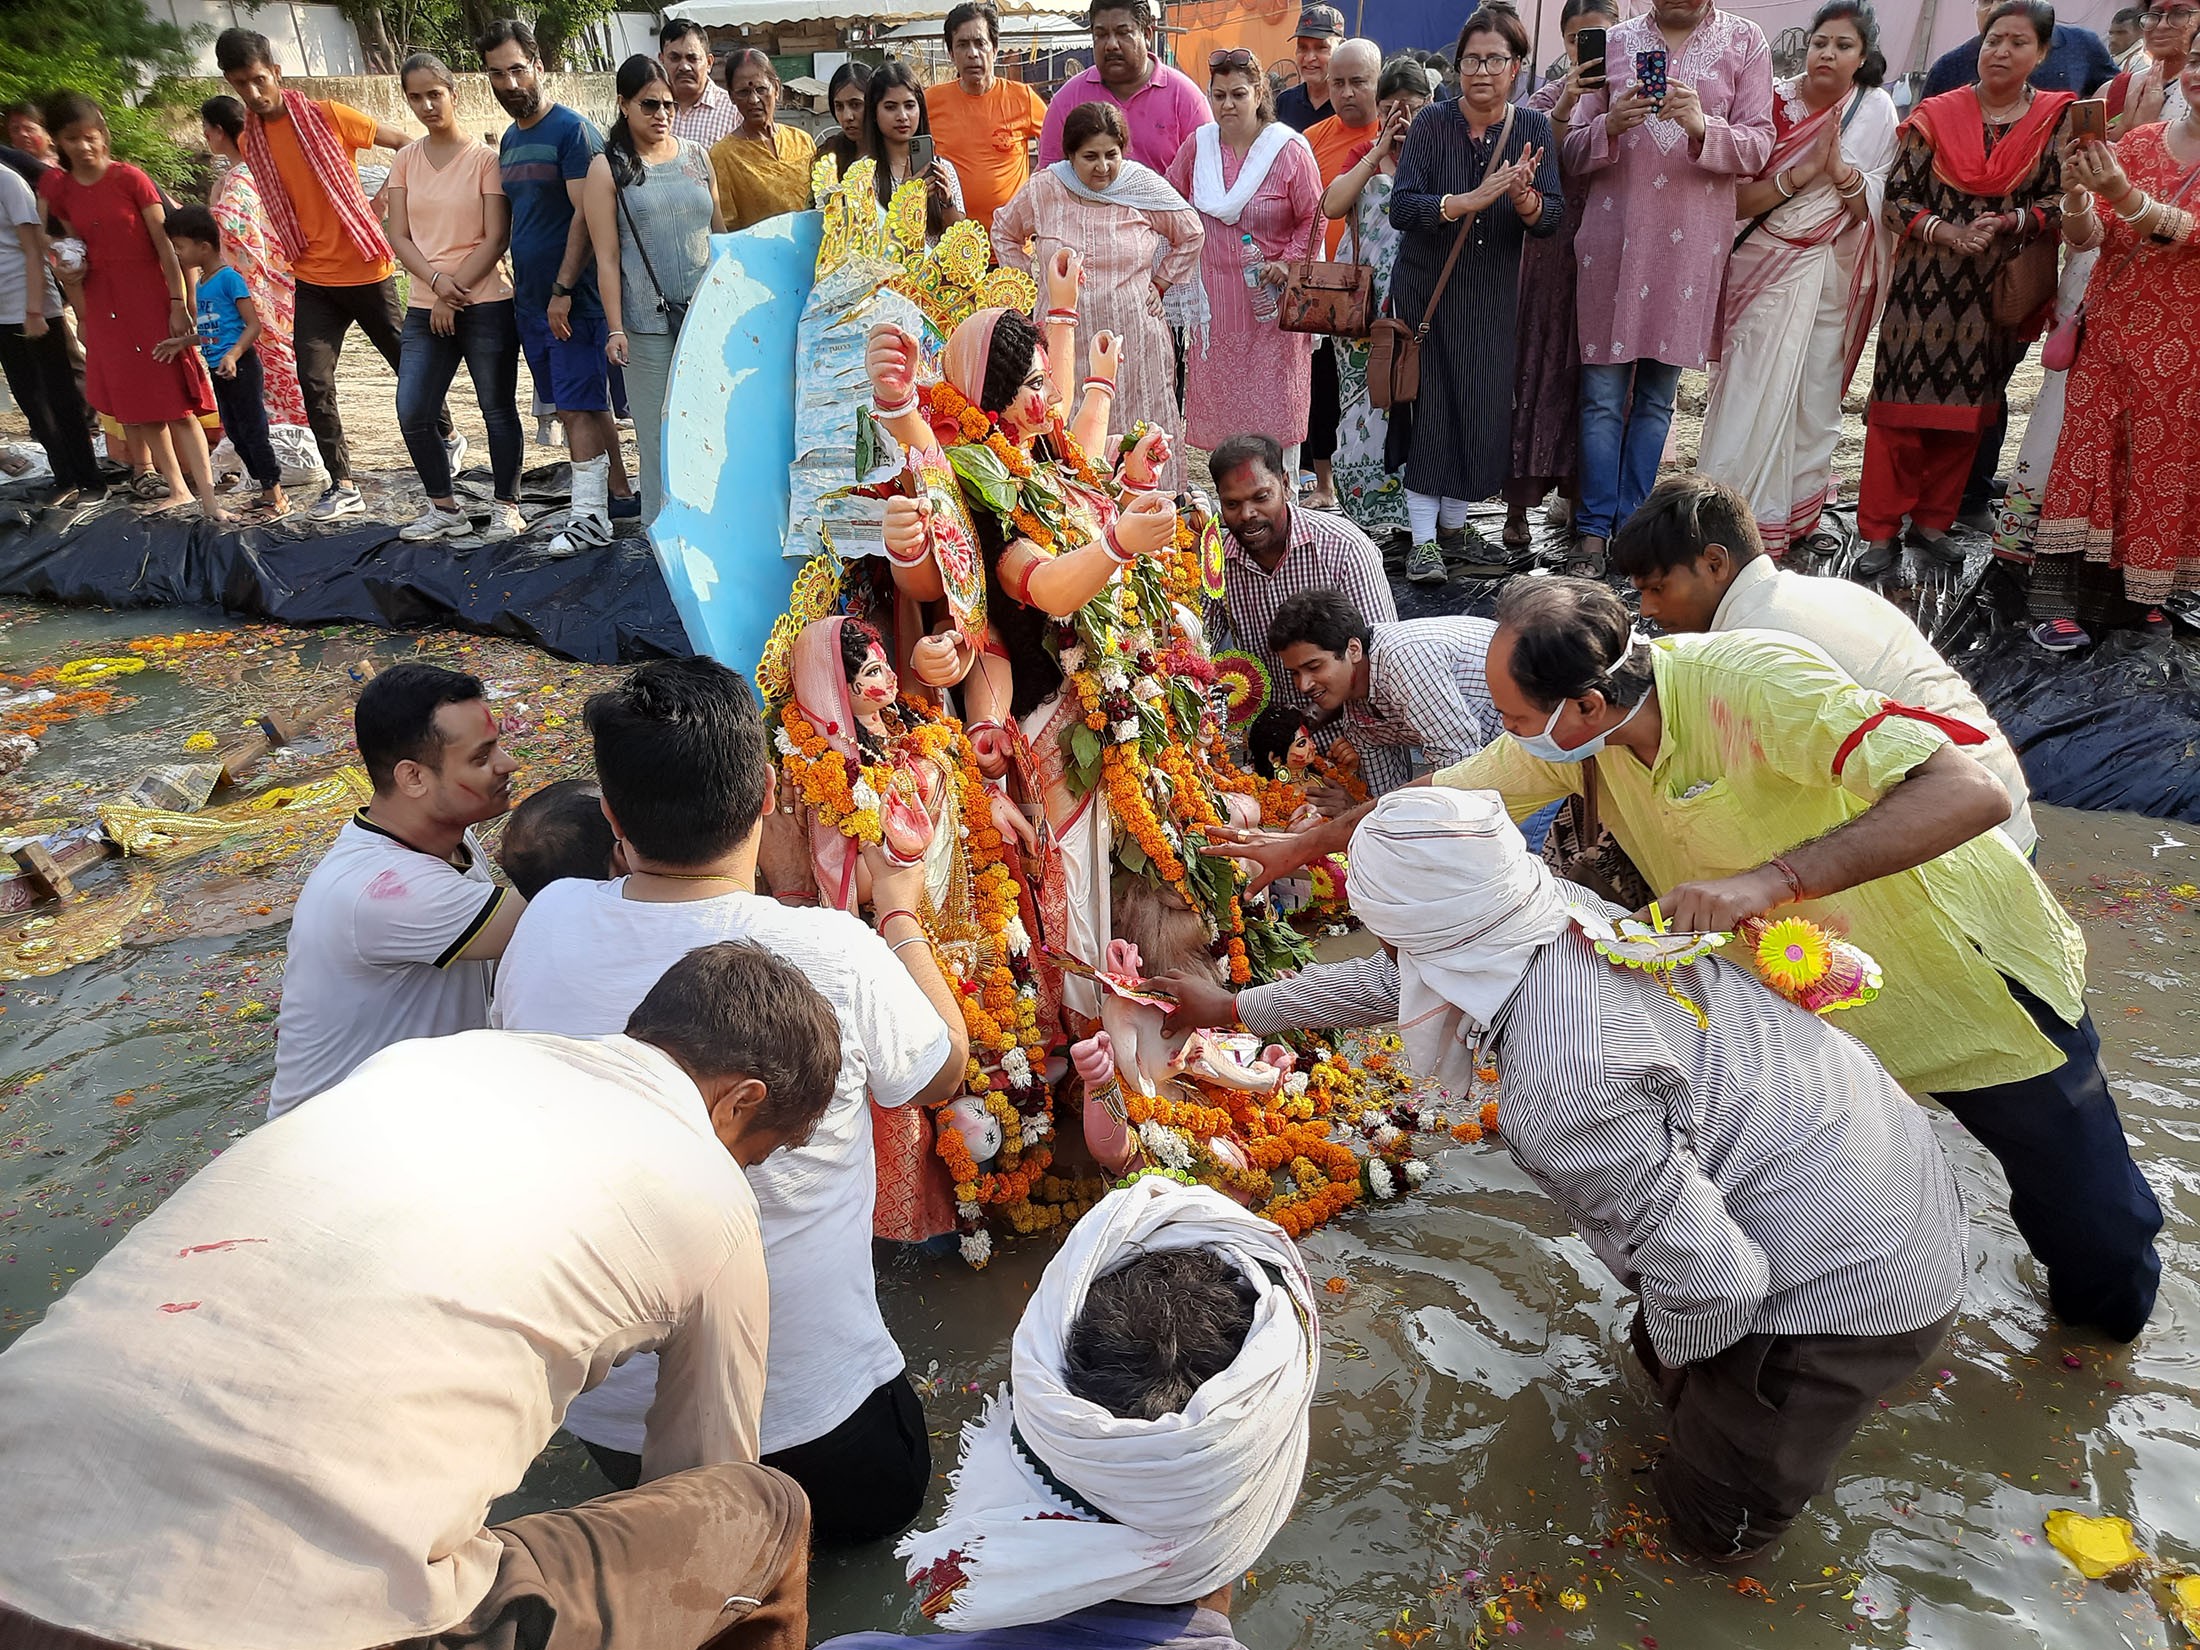 People stand on the edges of an artificial pond, watching a group of men as they prepare to lower a colourful idol of the Goddess Durga, laden with flowers, into the pond water